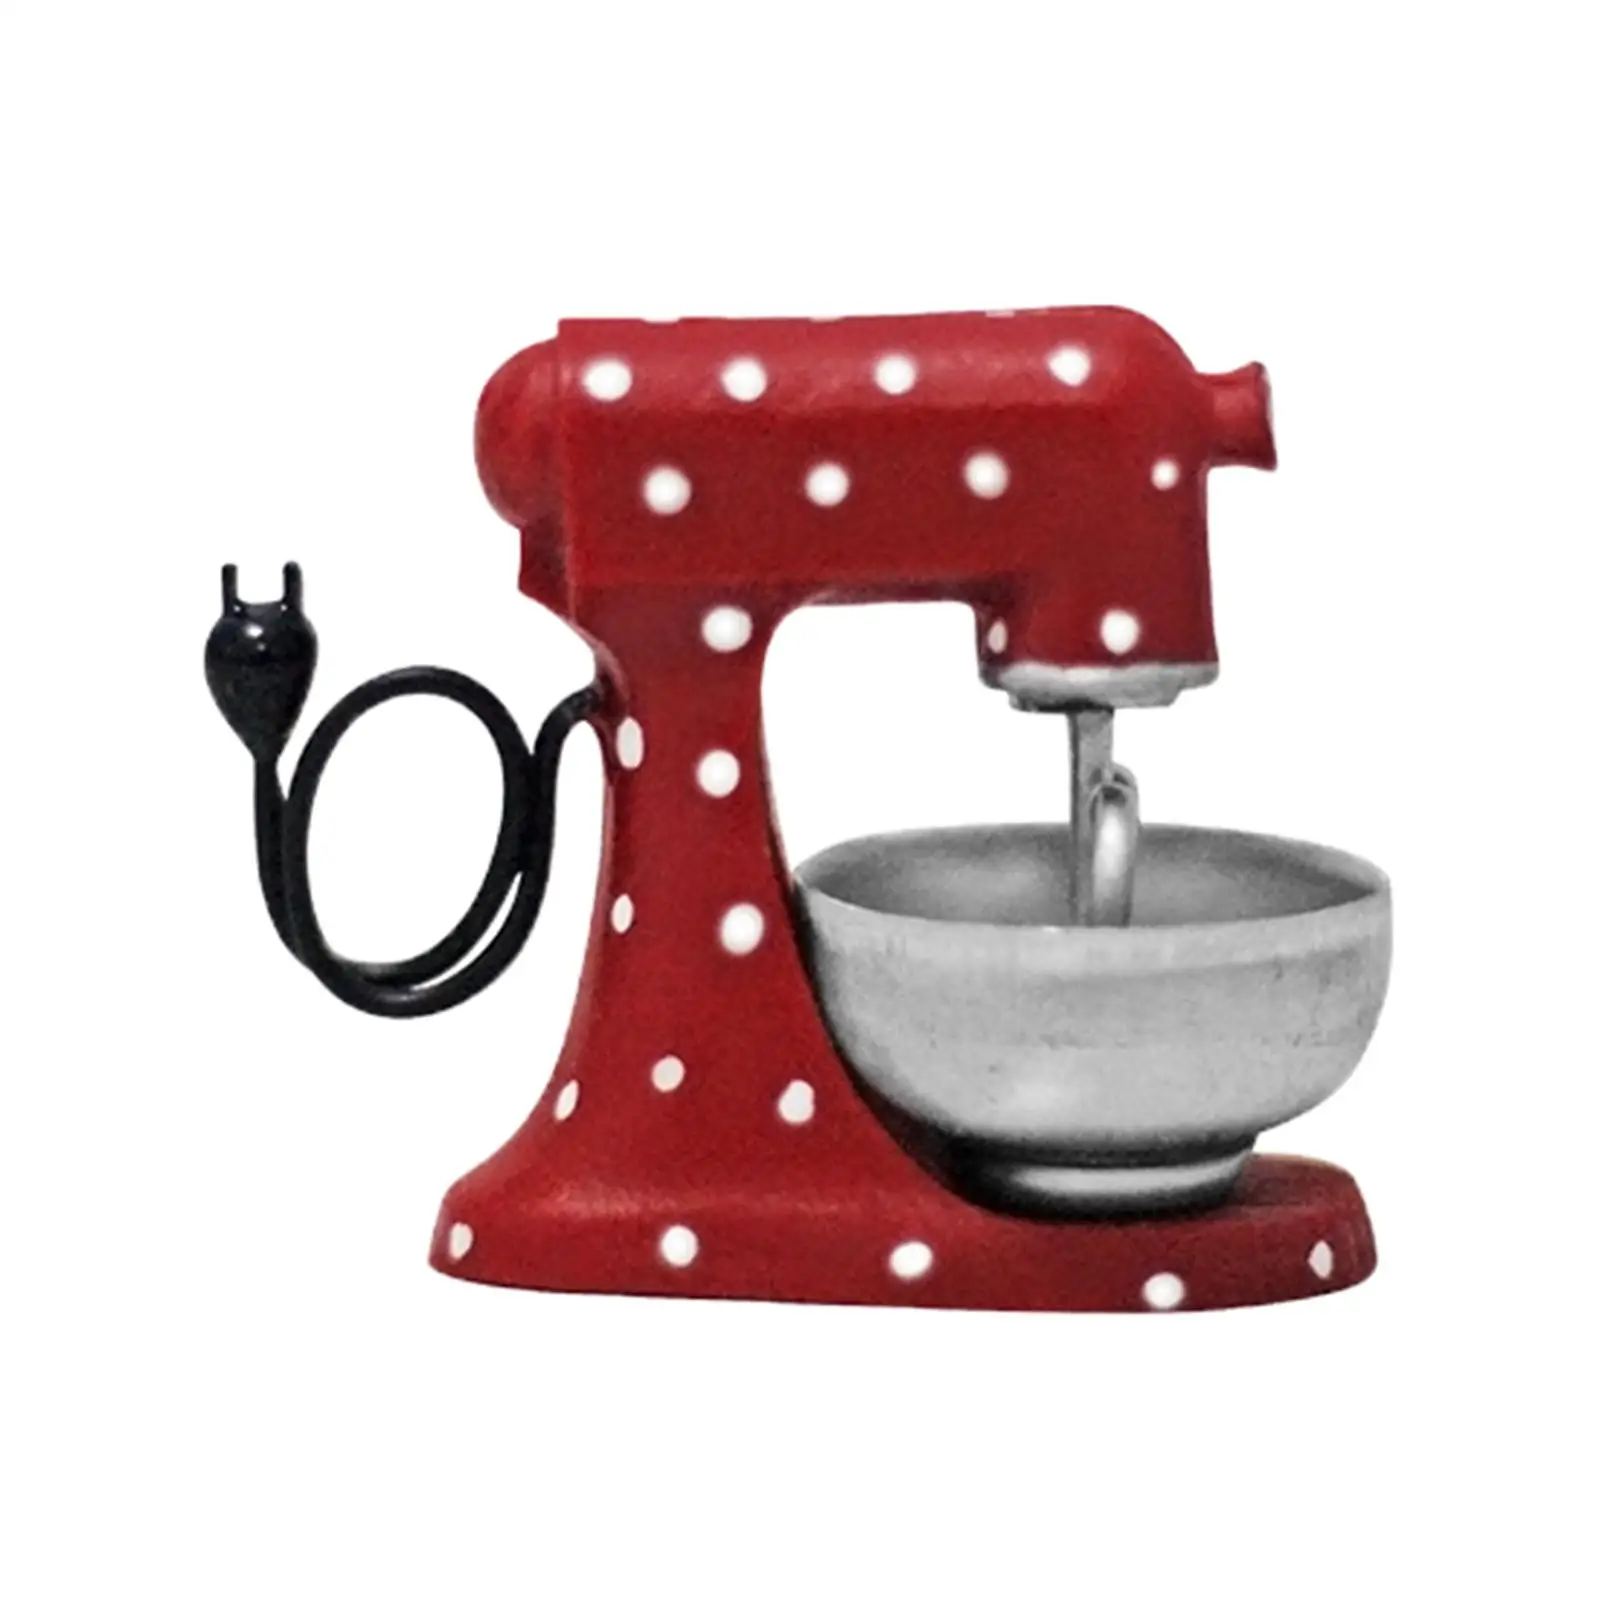 Mini Mixer Machine Dollhouse Handcraft Decoration Vintage Style Model Modern Resin 1:12 Scale for Tabletop Cooker Pretend Play